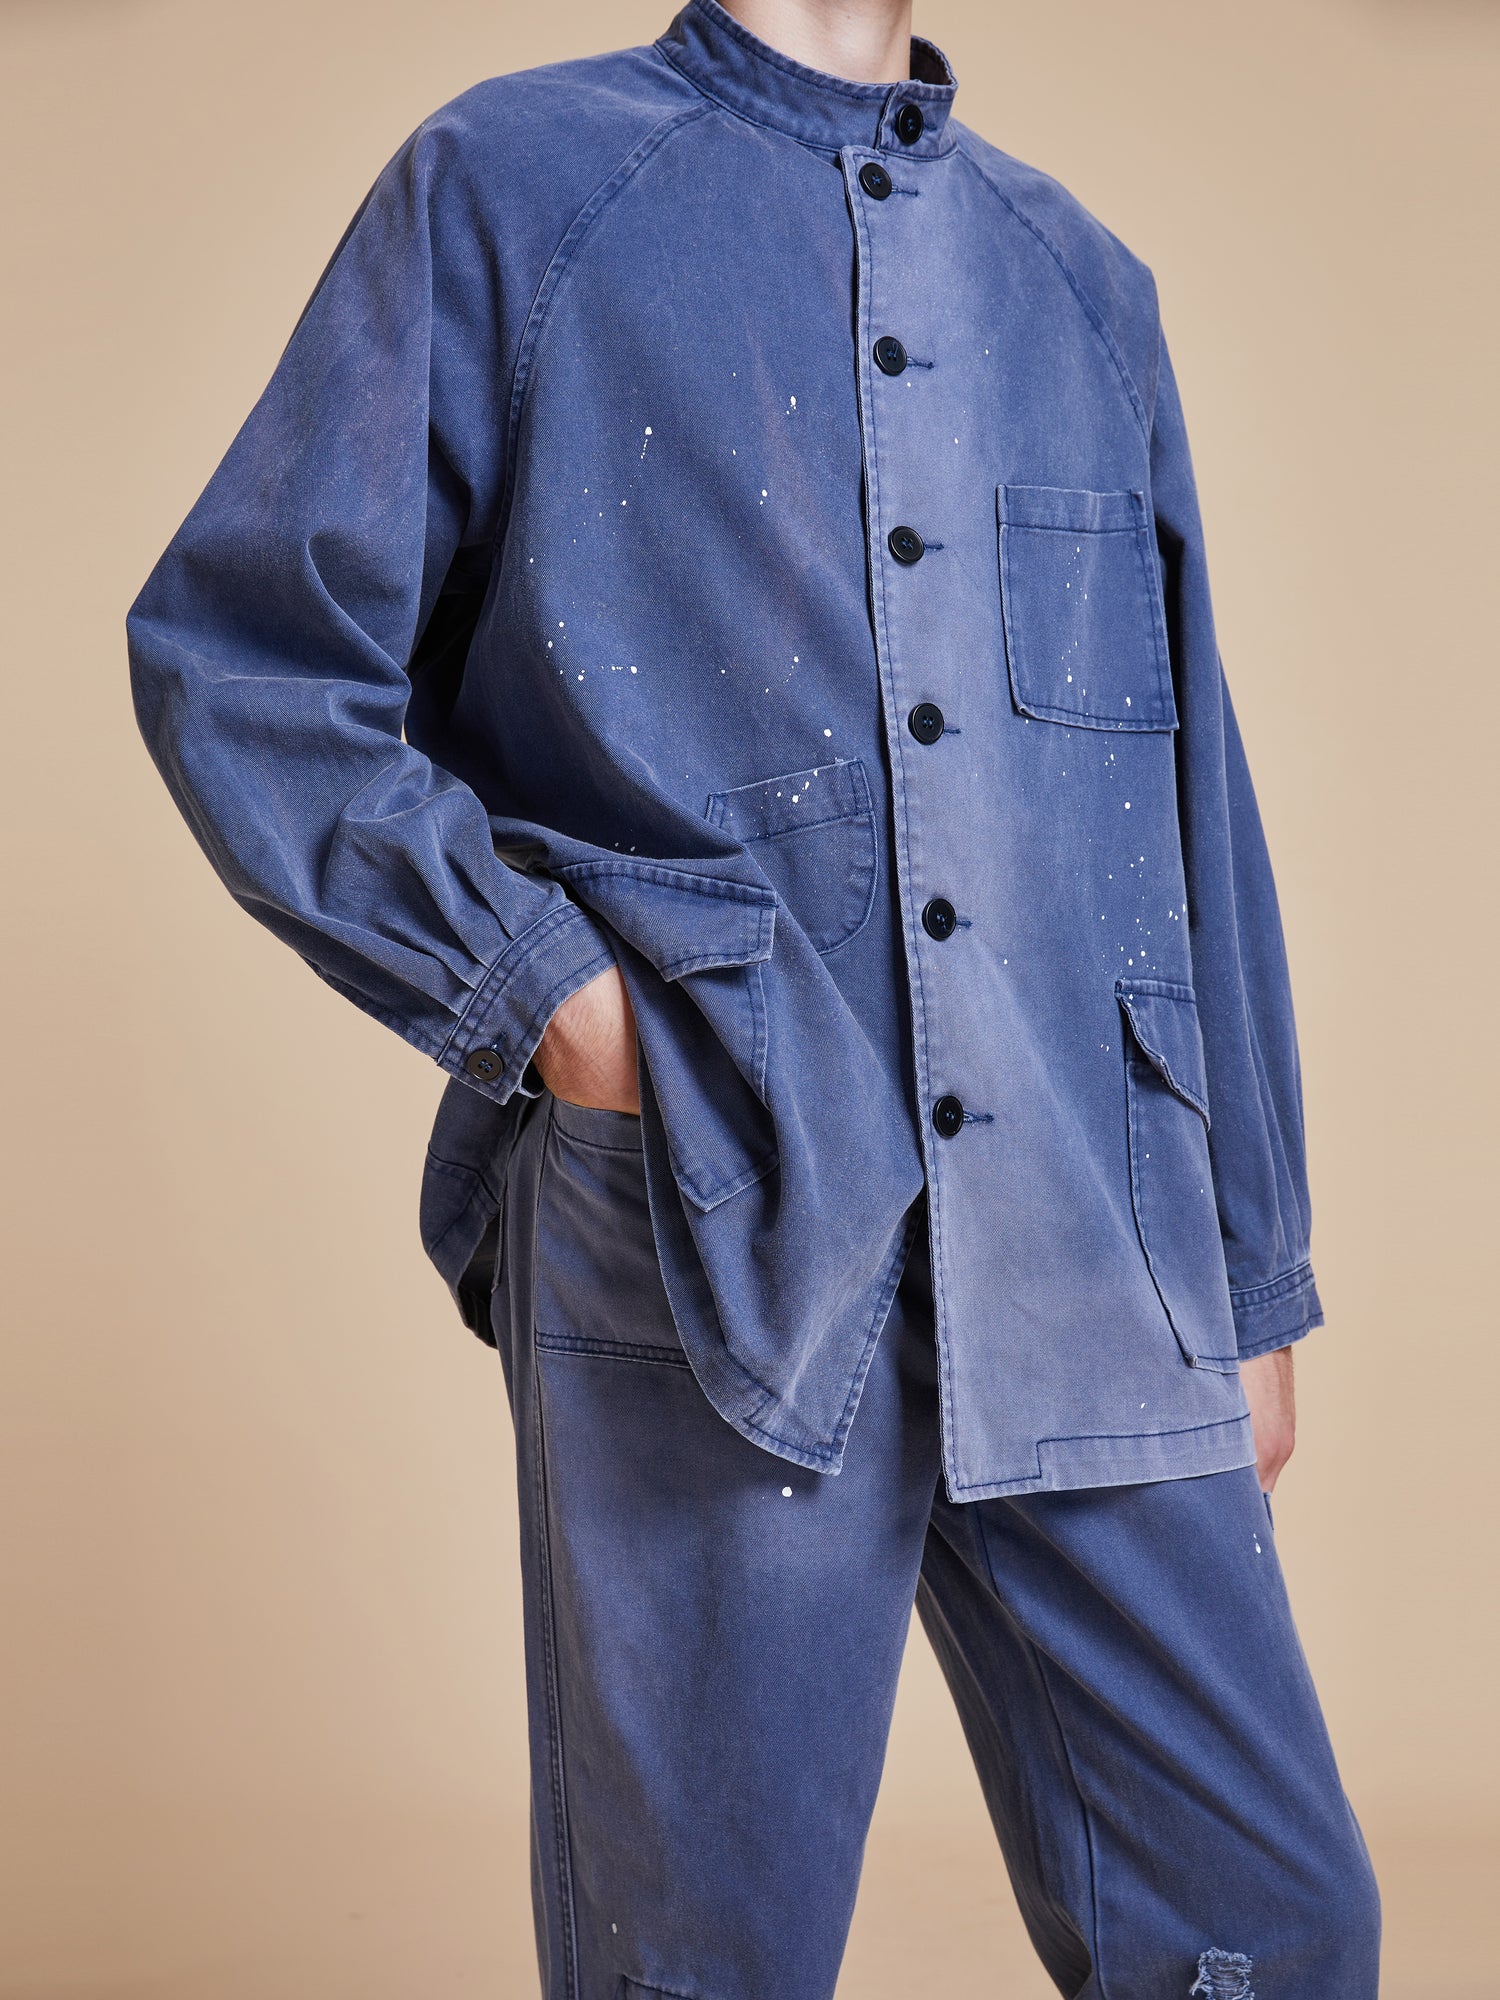 A model wearing a Found River Painters Chore Coat and pants.